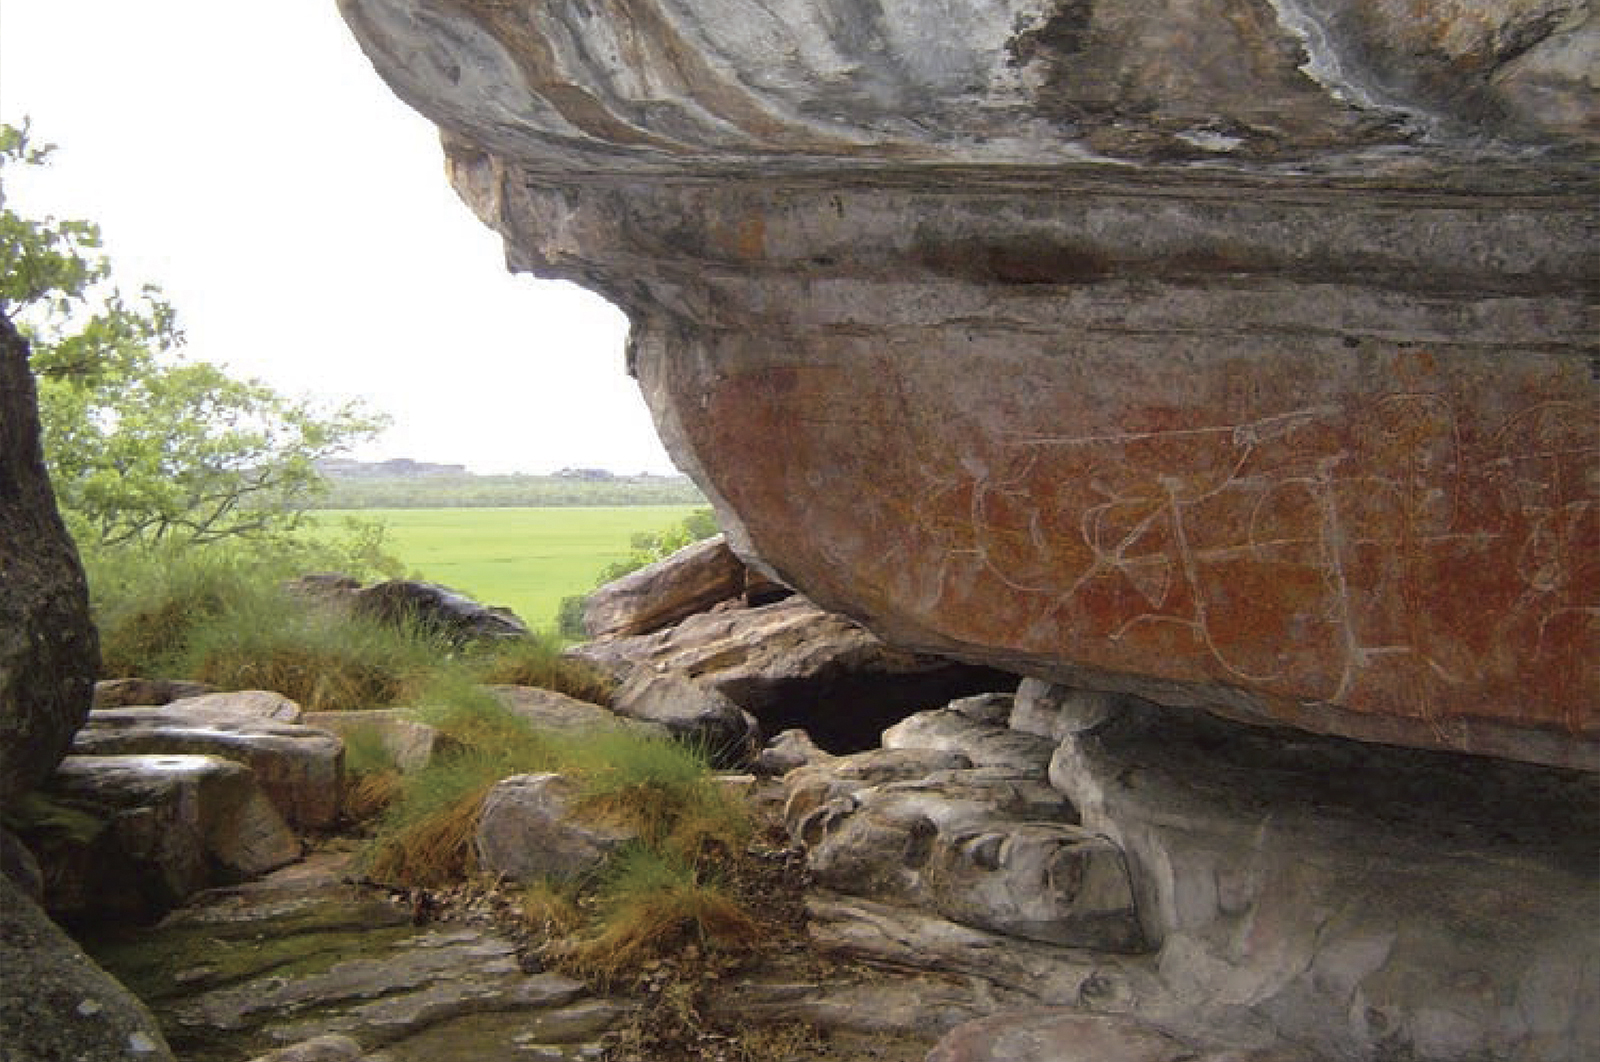 The record of climate change and human adaption: Kakadu National Park, a World Heritage site in Australia, contains one of the world’s greatest concentrations of rock art